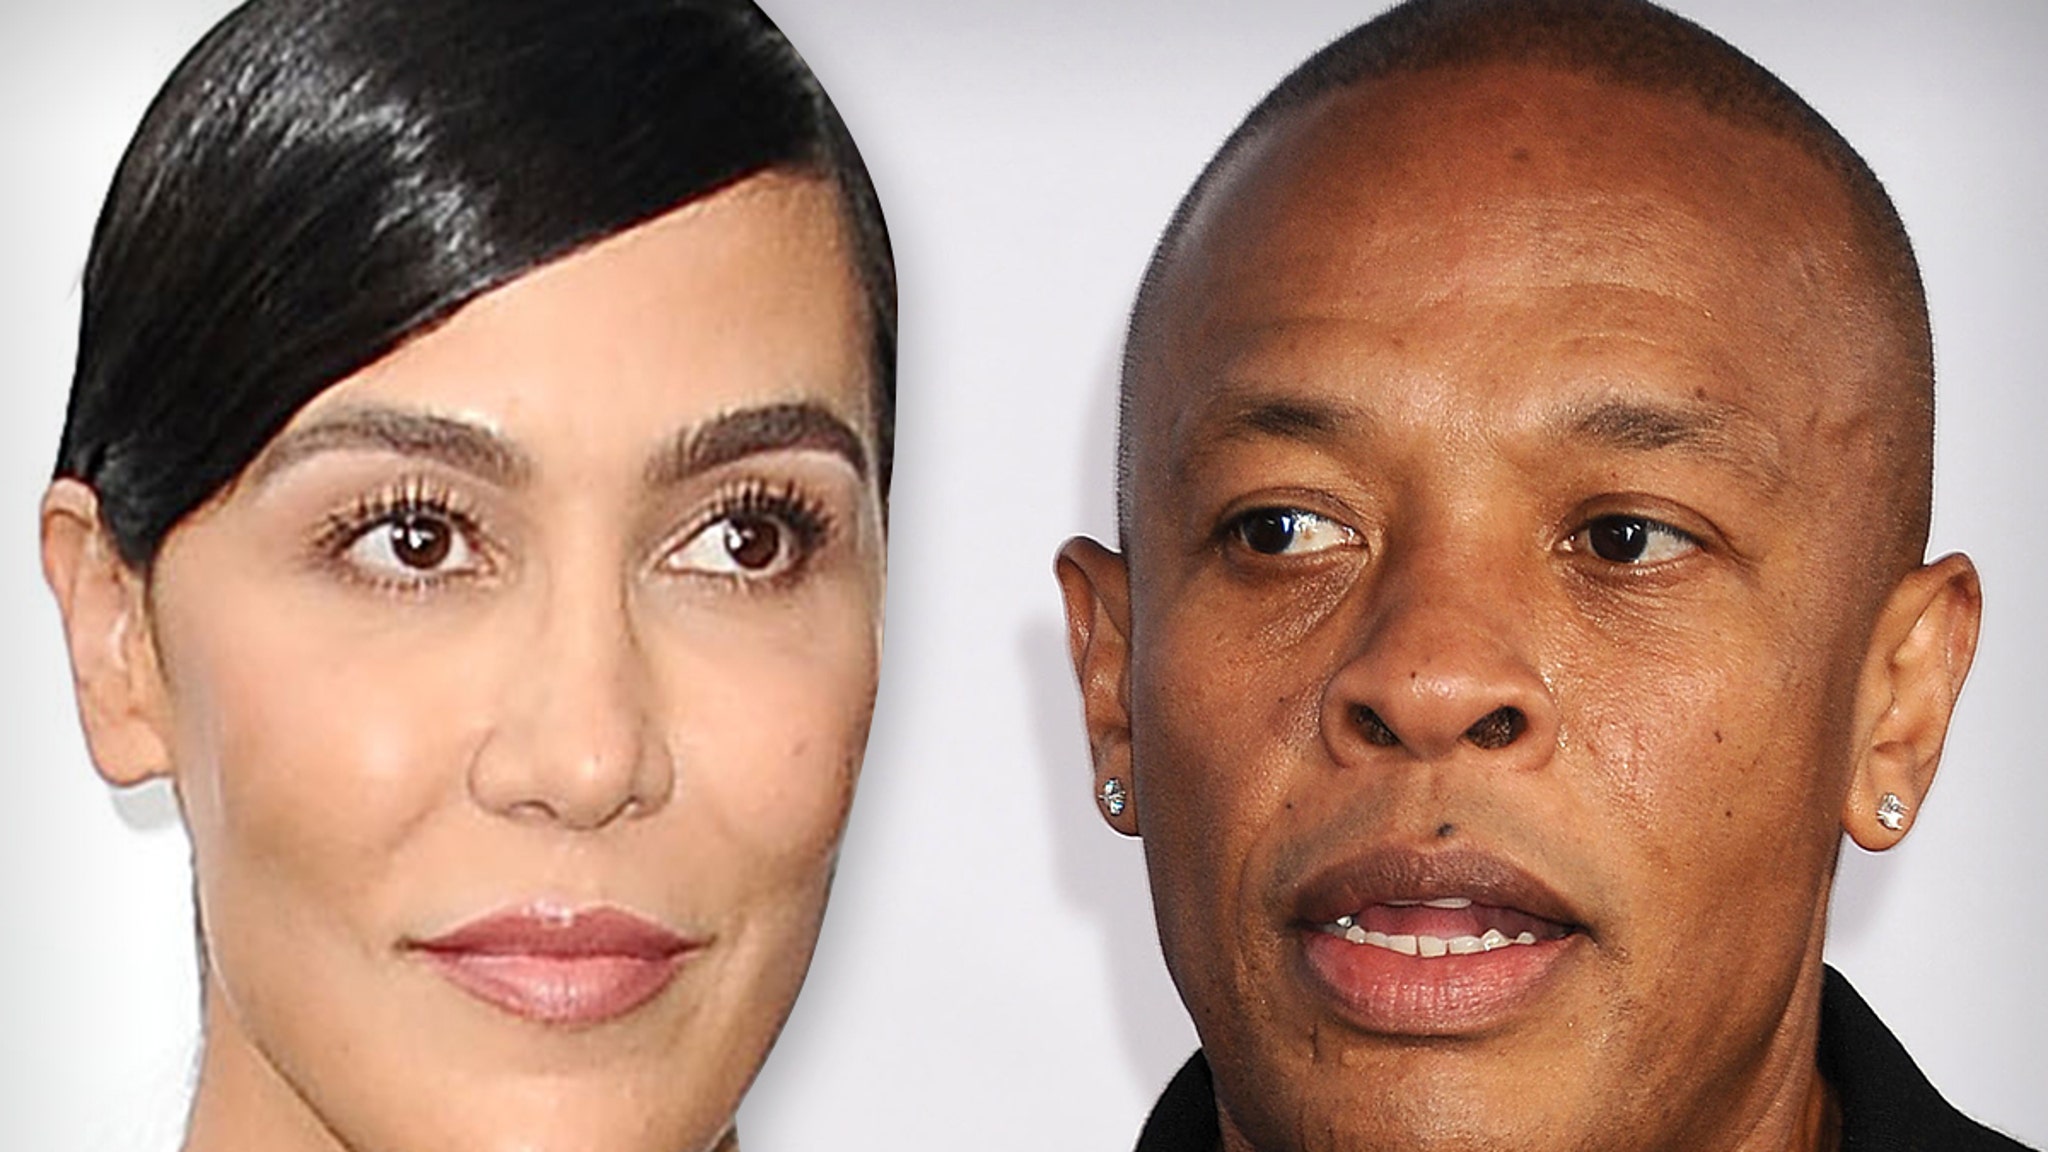 Dr Dre’s estranged wife wants home inspection to get her stuff